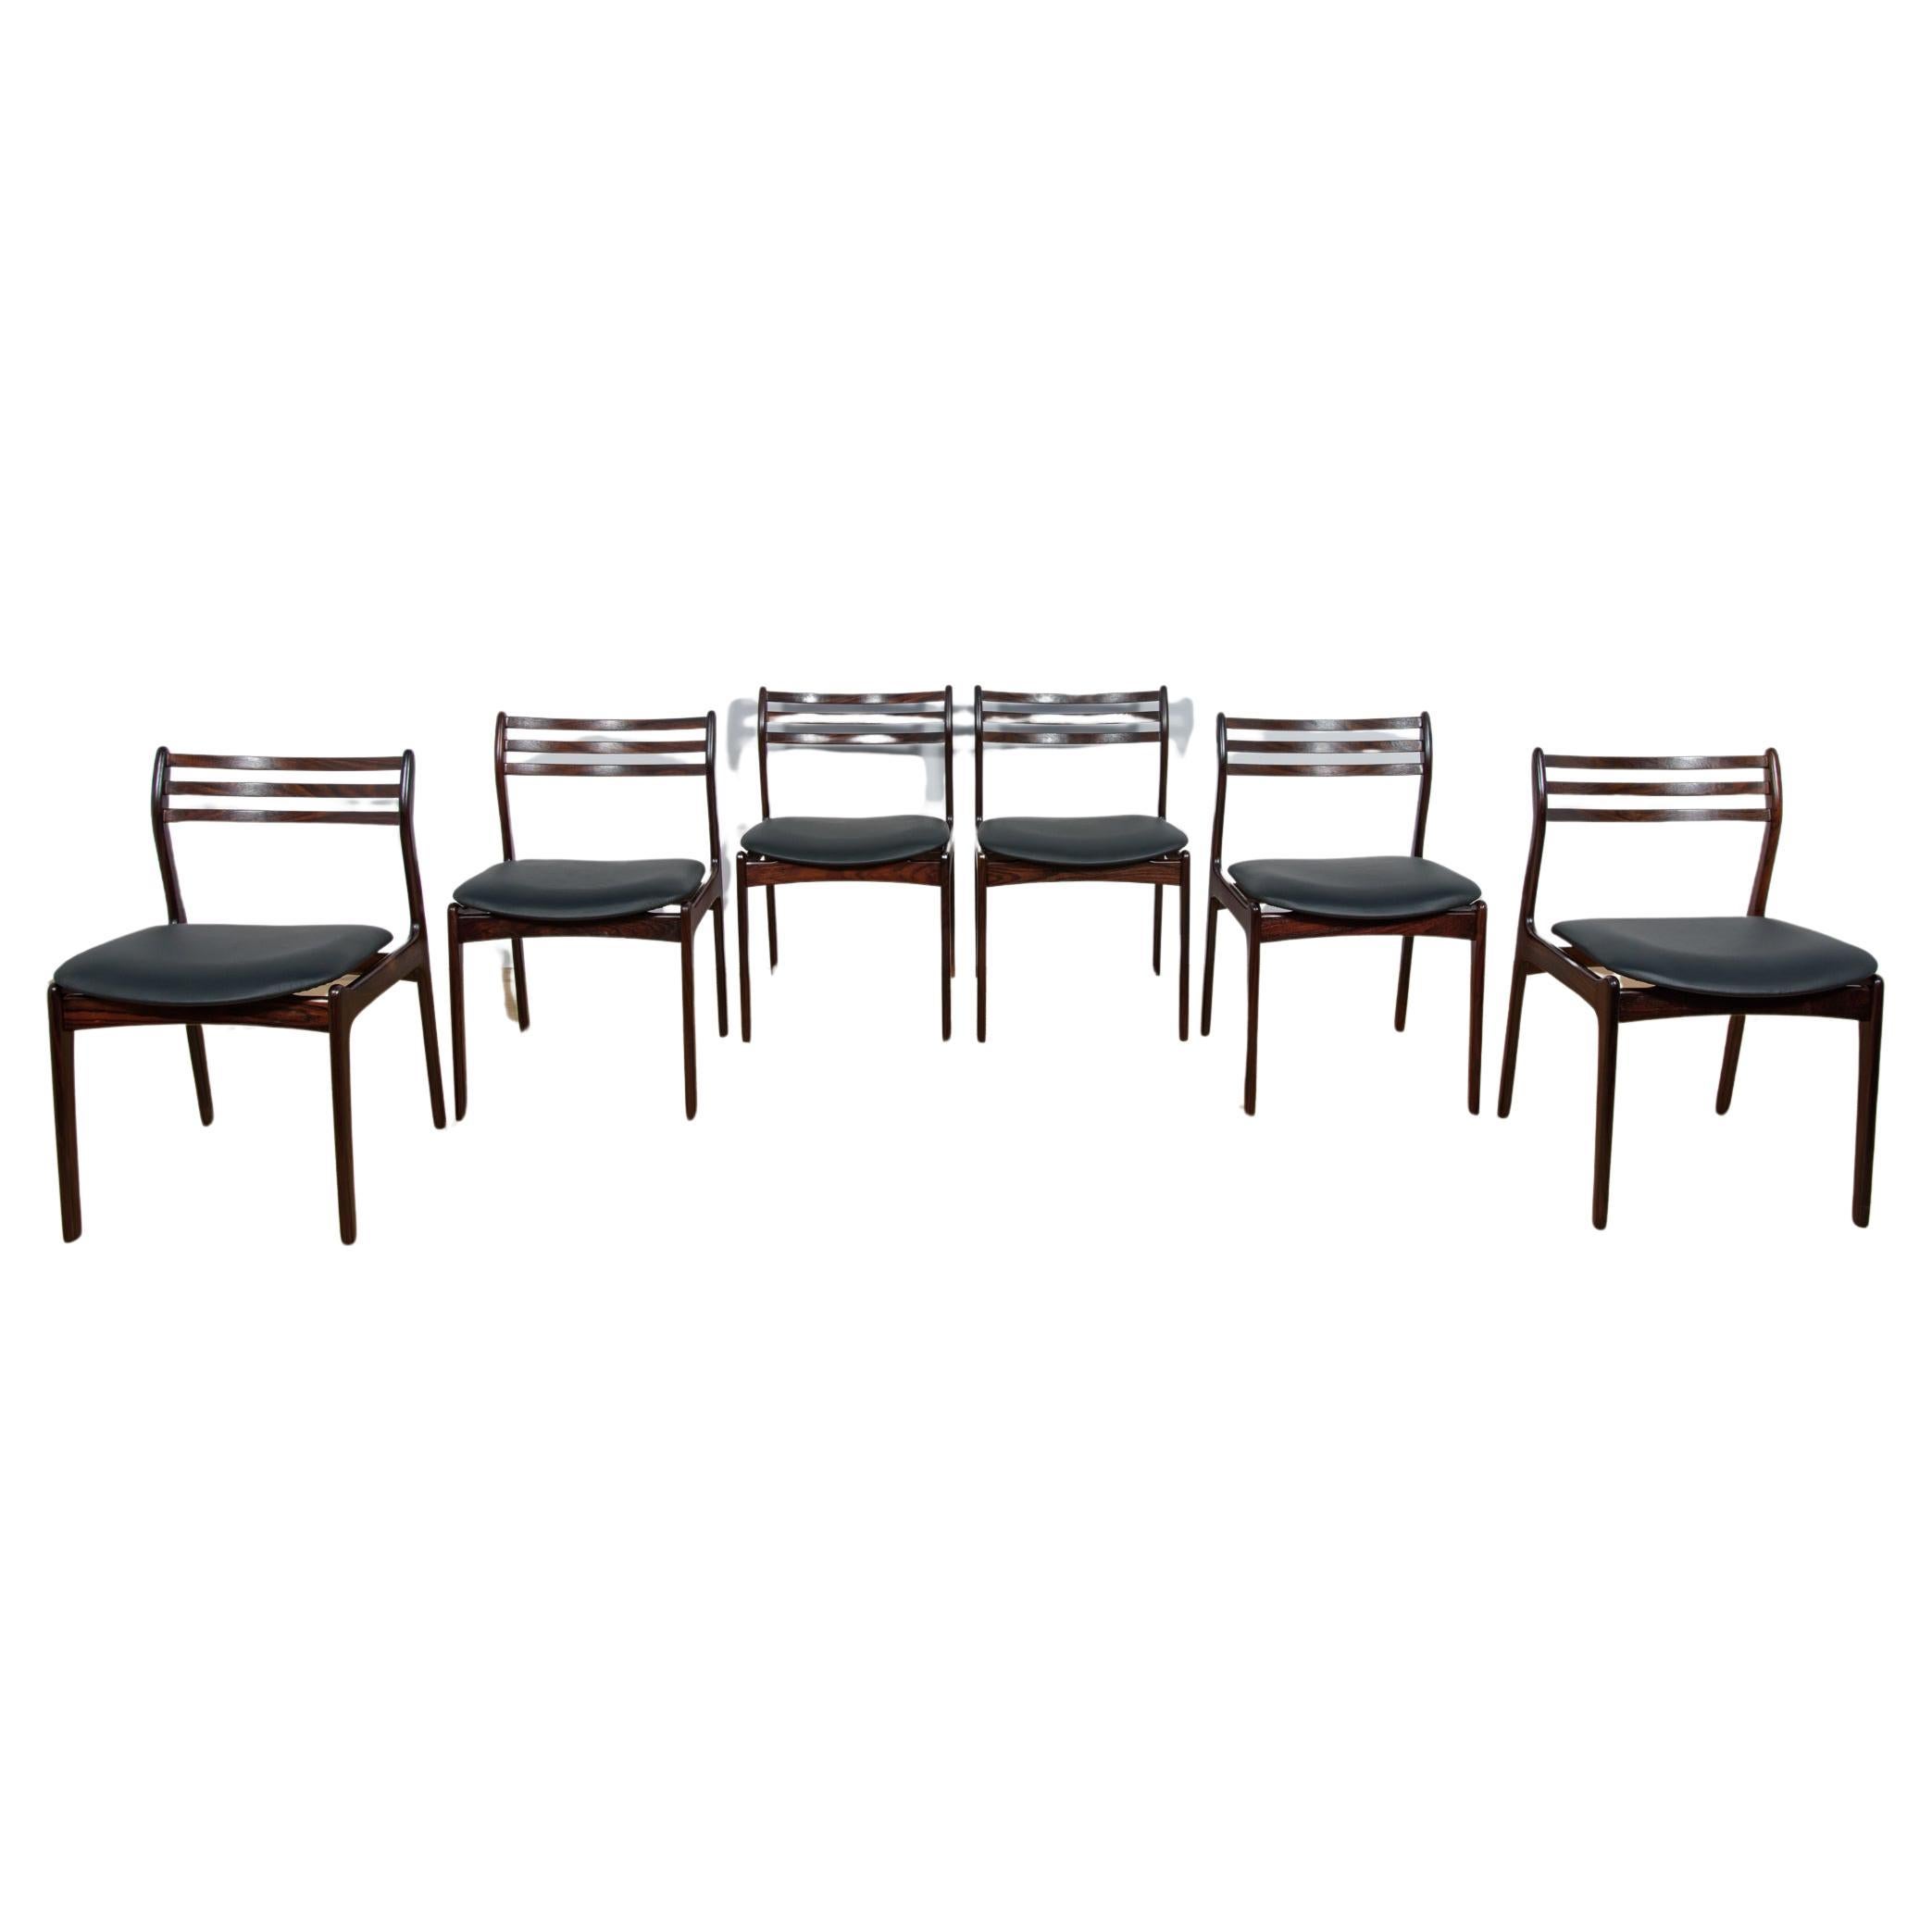  Mid-Century Rosewood Dining Chairs by Vestervig Eriksen for Brdr. Tromborg.